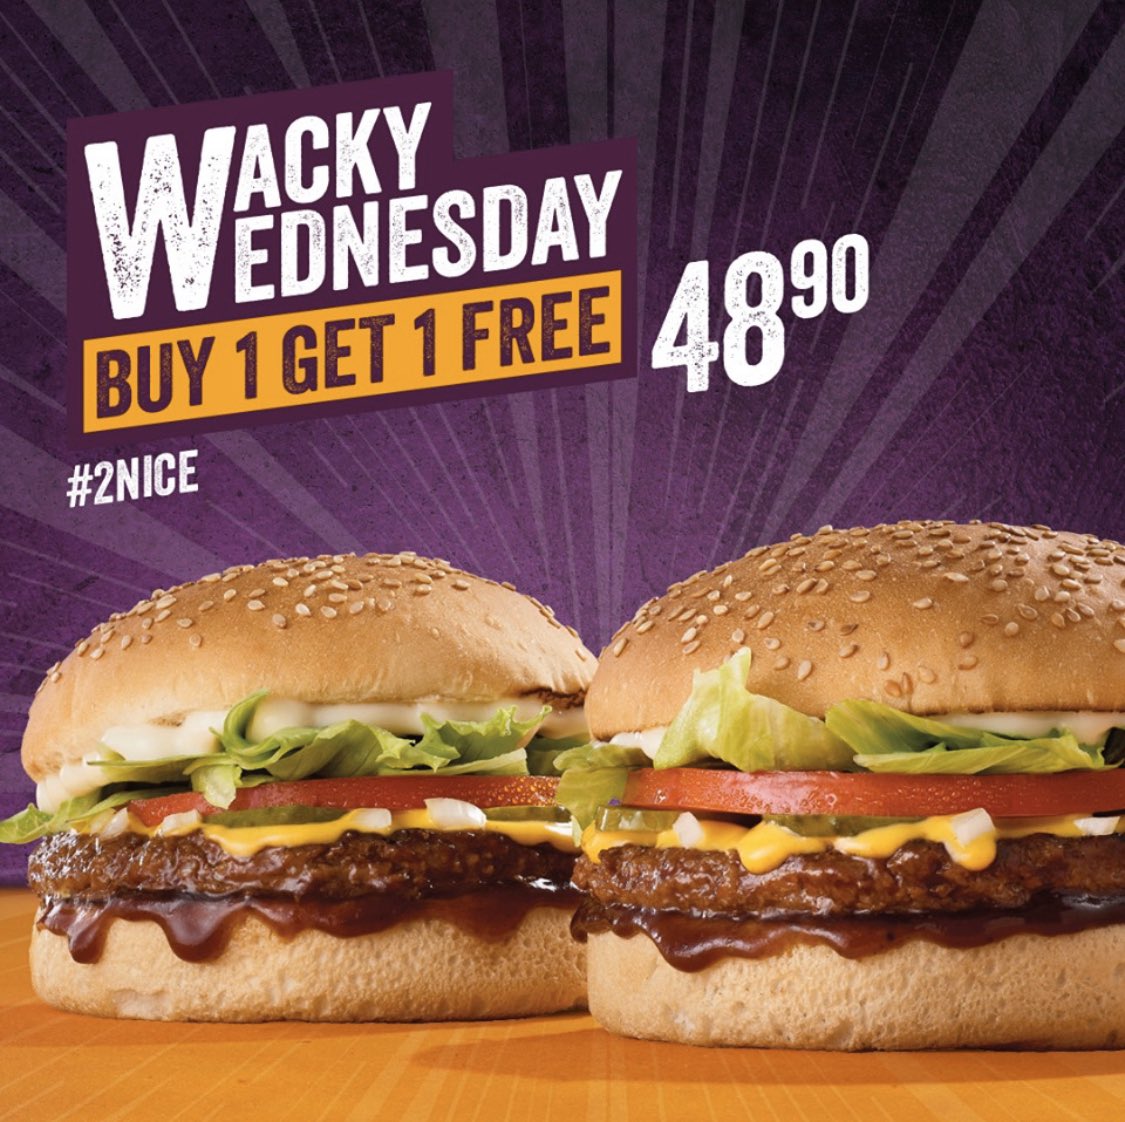 Steers also still open for those fast food burger cravings , they have an app you can download and place your orders on or call 393 7771Or 74692800. Ps it’s wacky Wednesday today